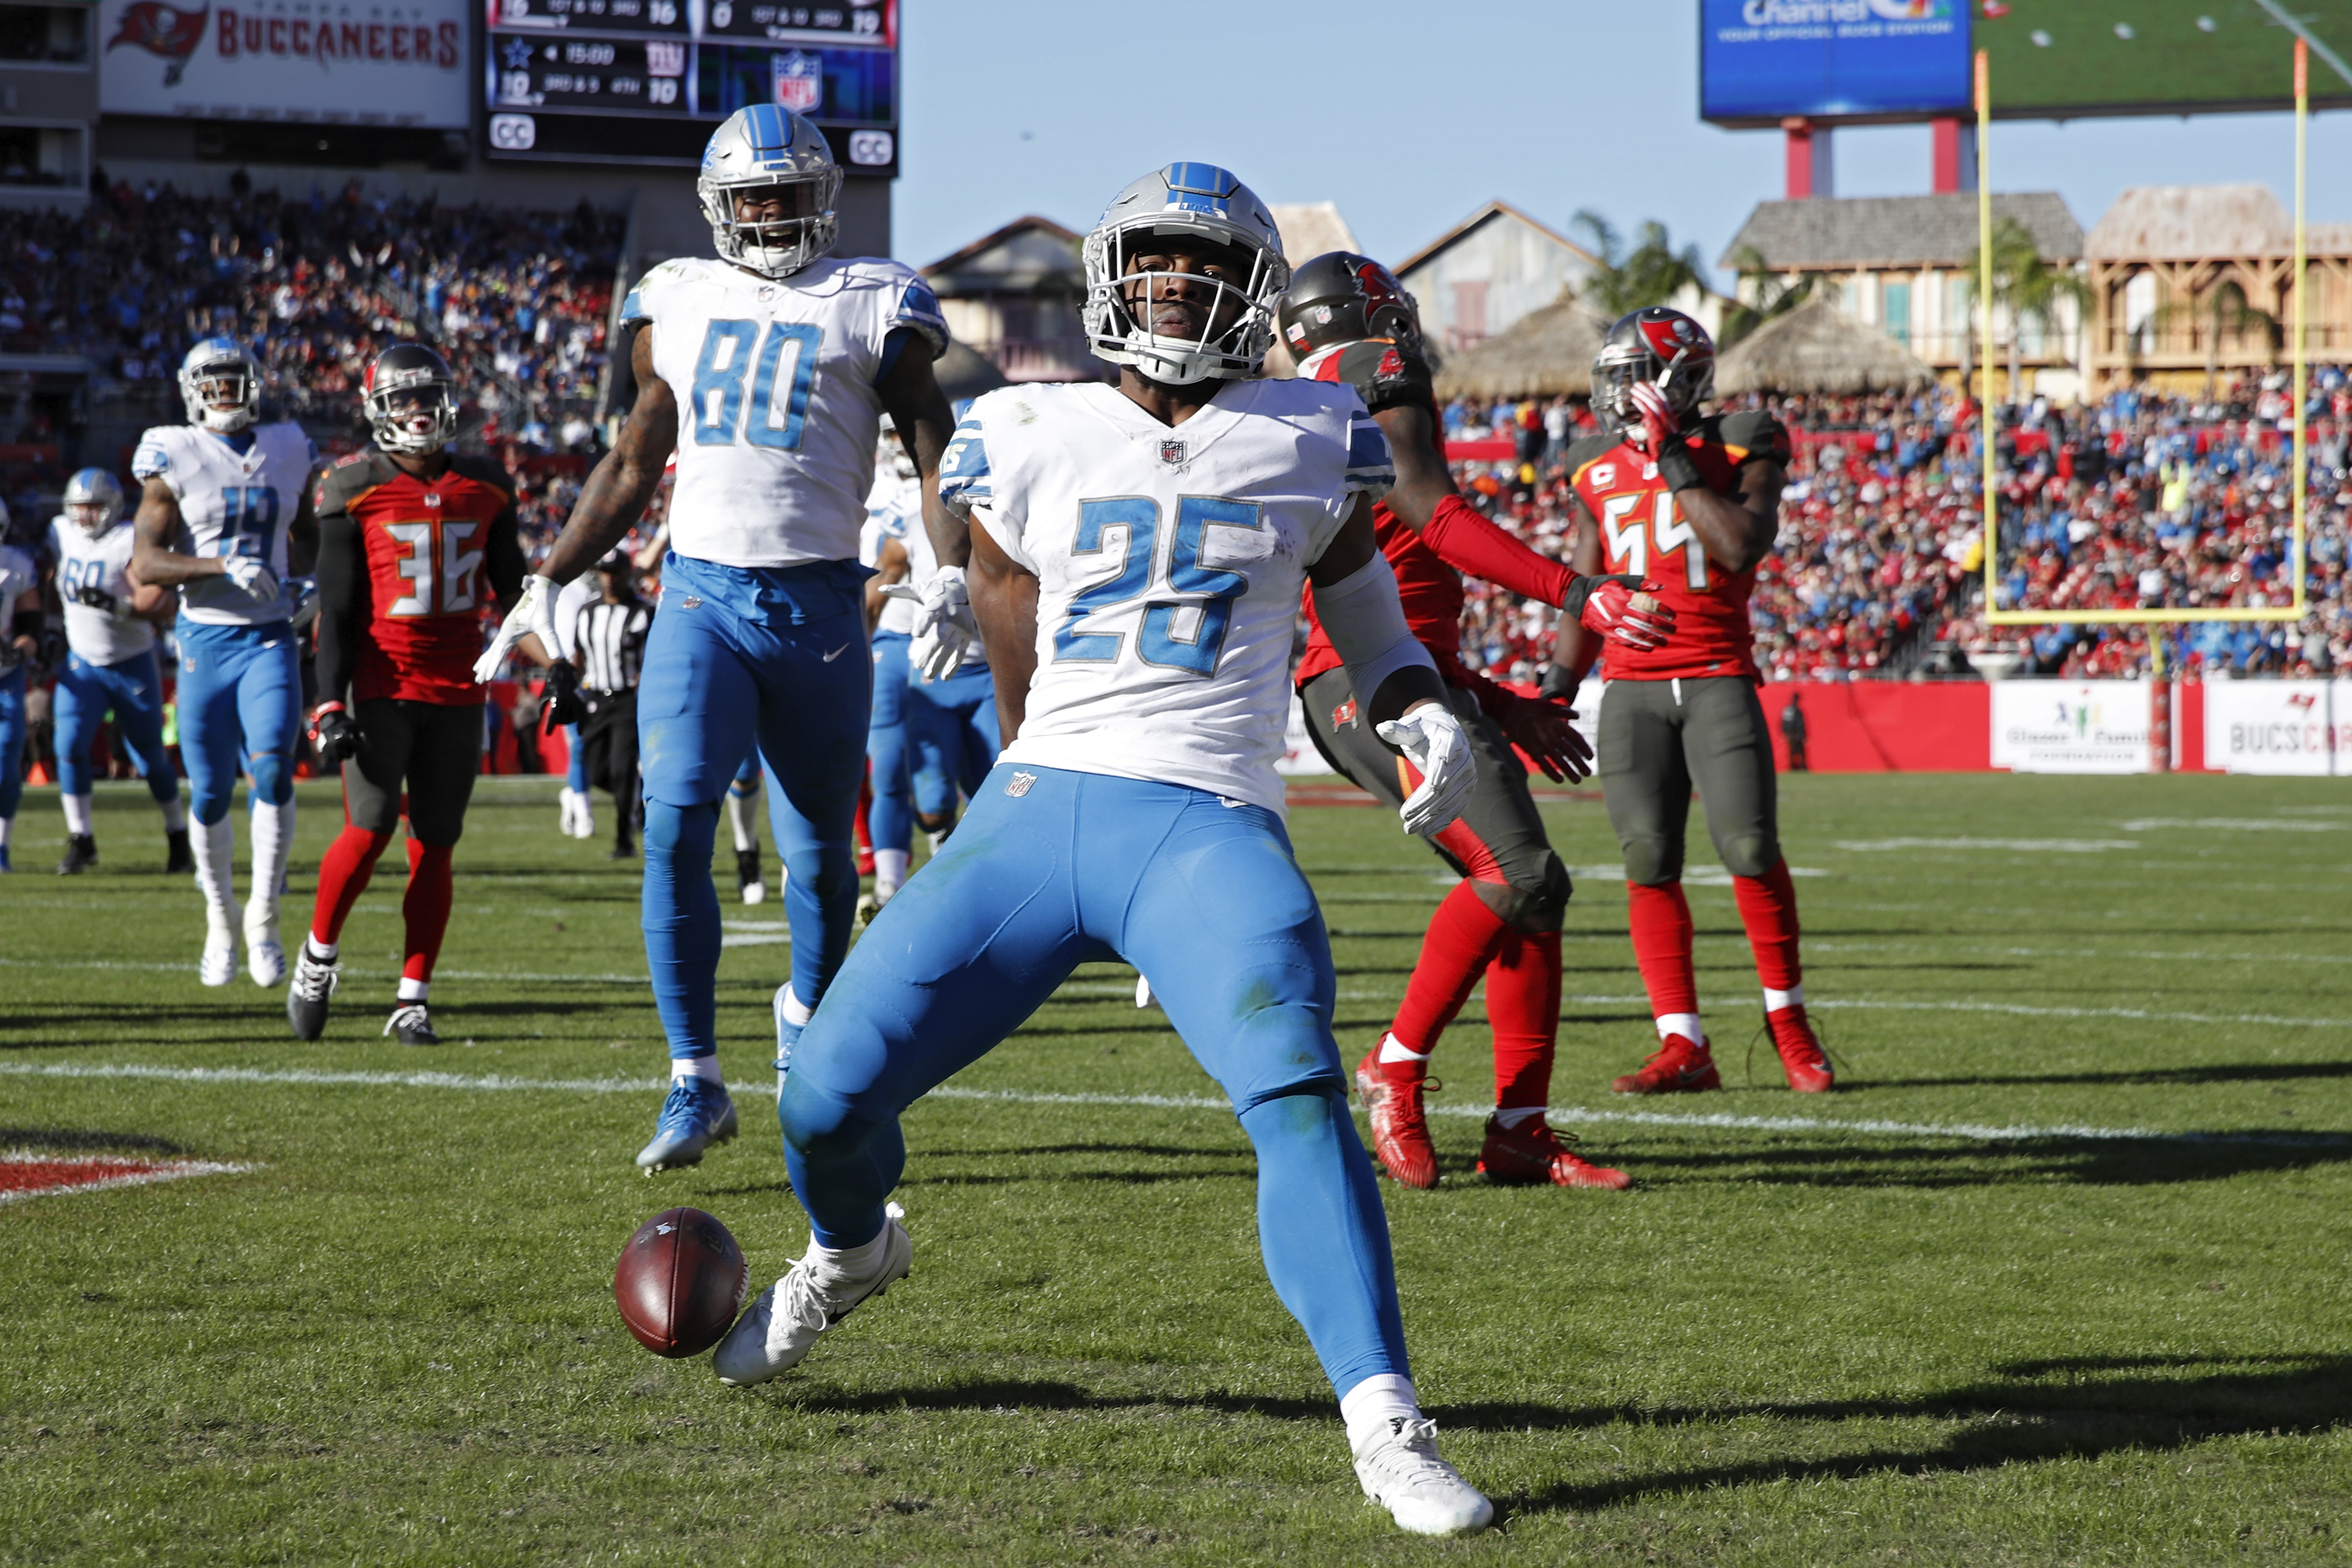 Stafford, Prater keep Detroit Lions in hunt with win at Bucs